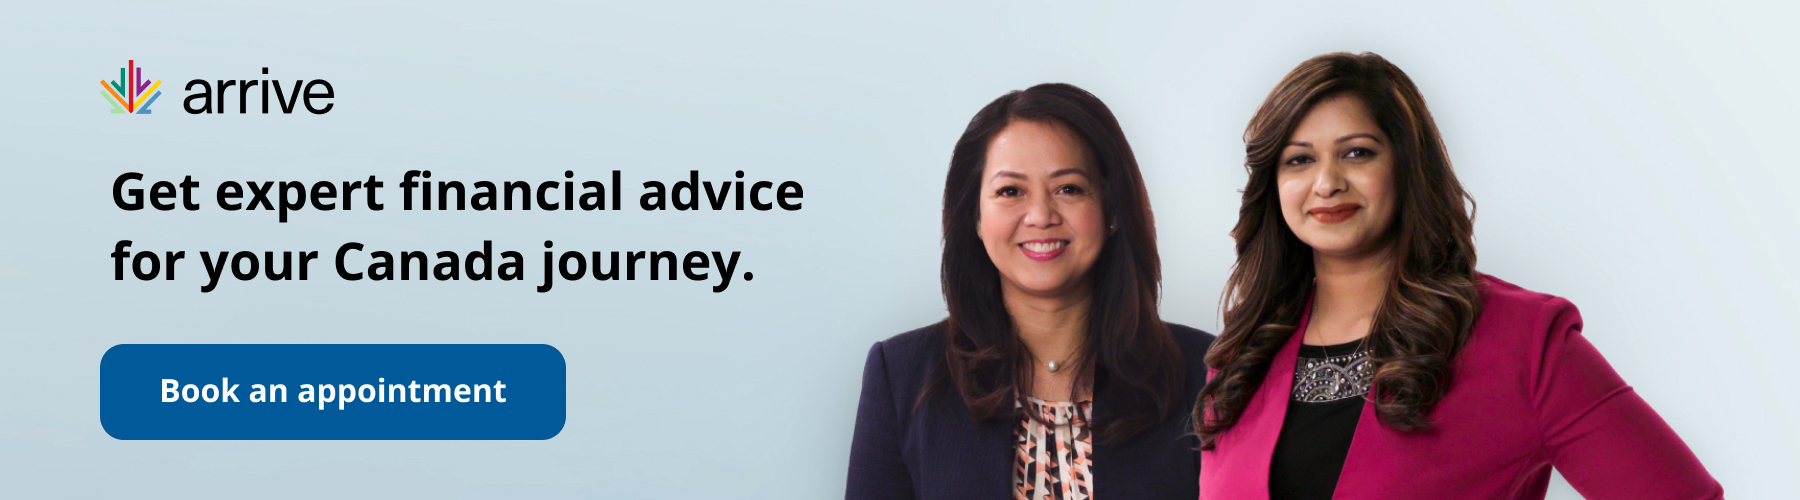 Book an appointment to speak with an advisor about banking in Canada